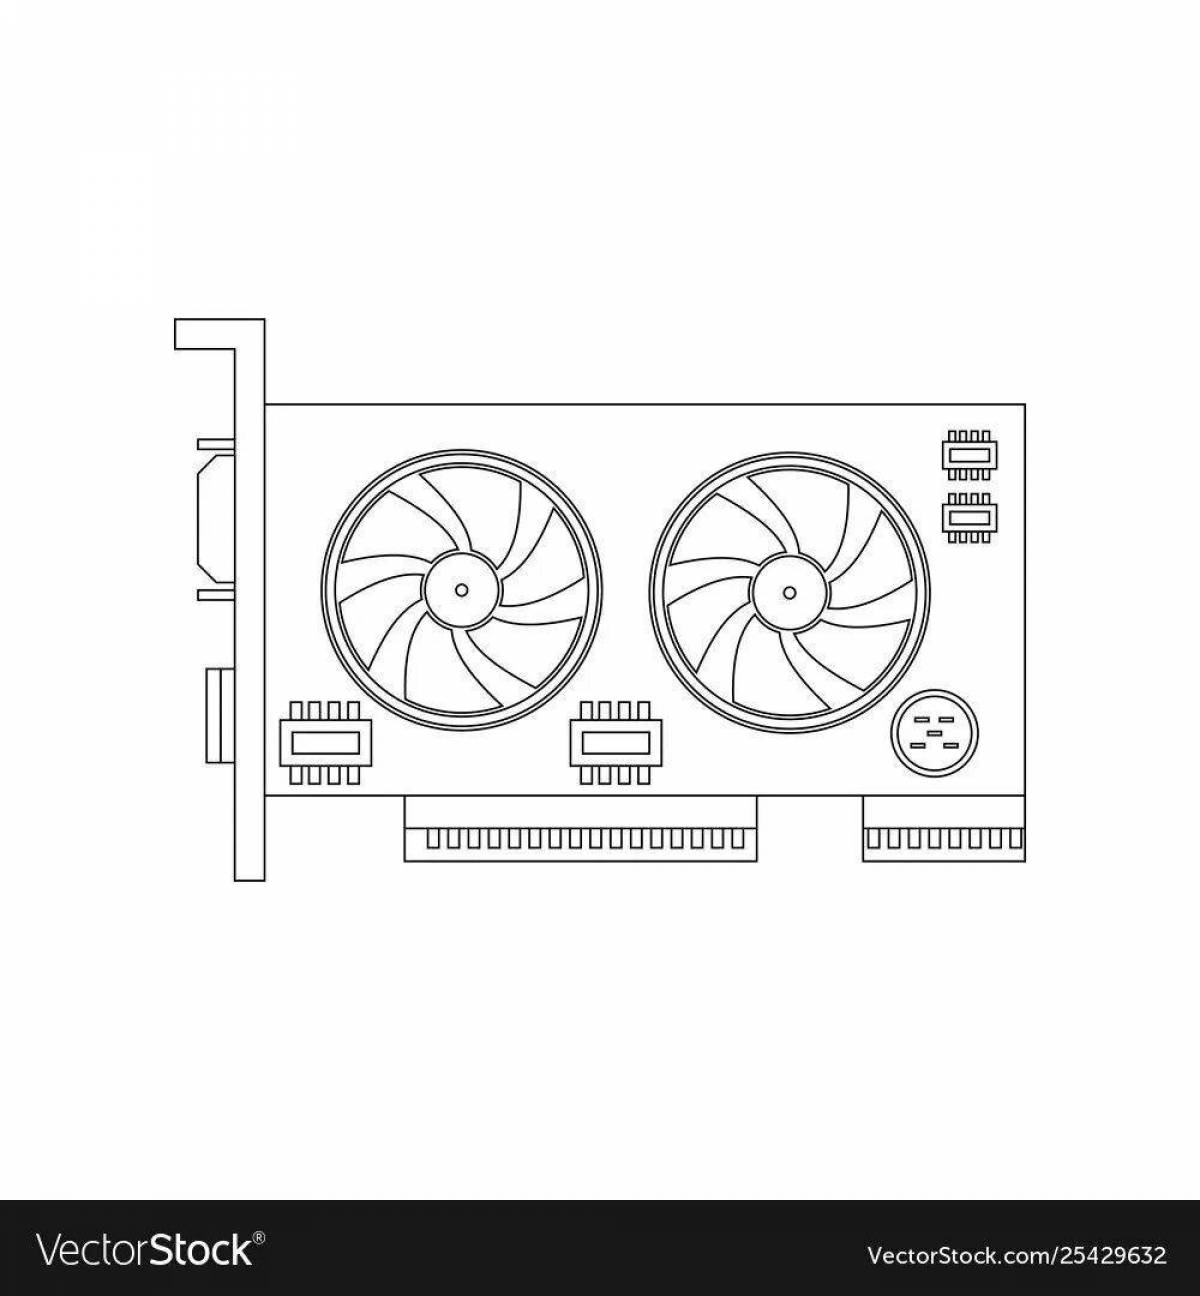 Vibrant graphics card coloring page